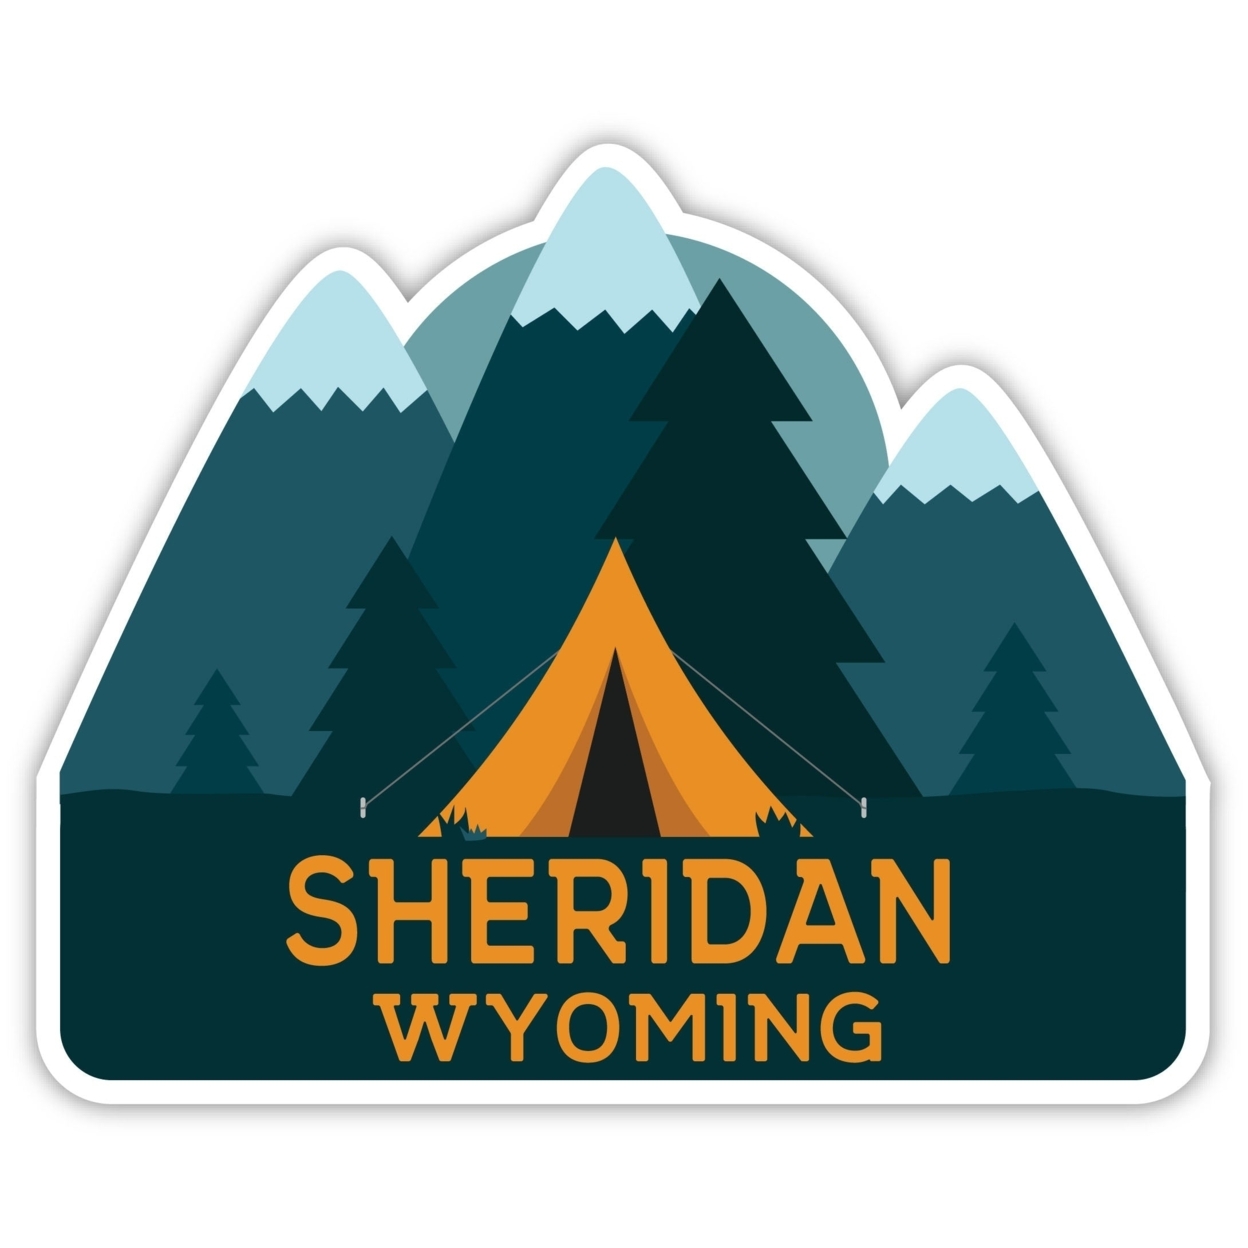 Sheridan Wyoming Souvenir Decorative Stickers (Choose Theme And Size) - Single Unit, 2-Inch, Adventures Awaits